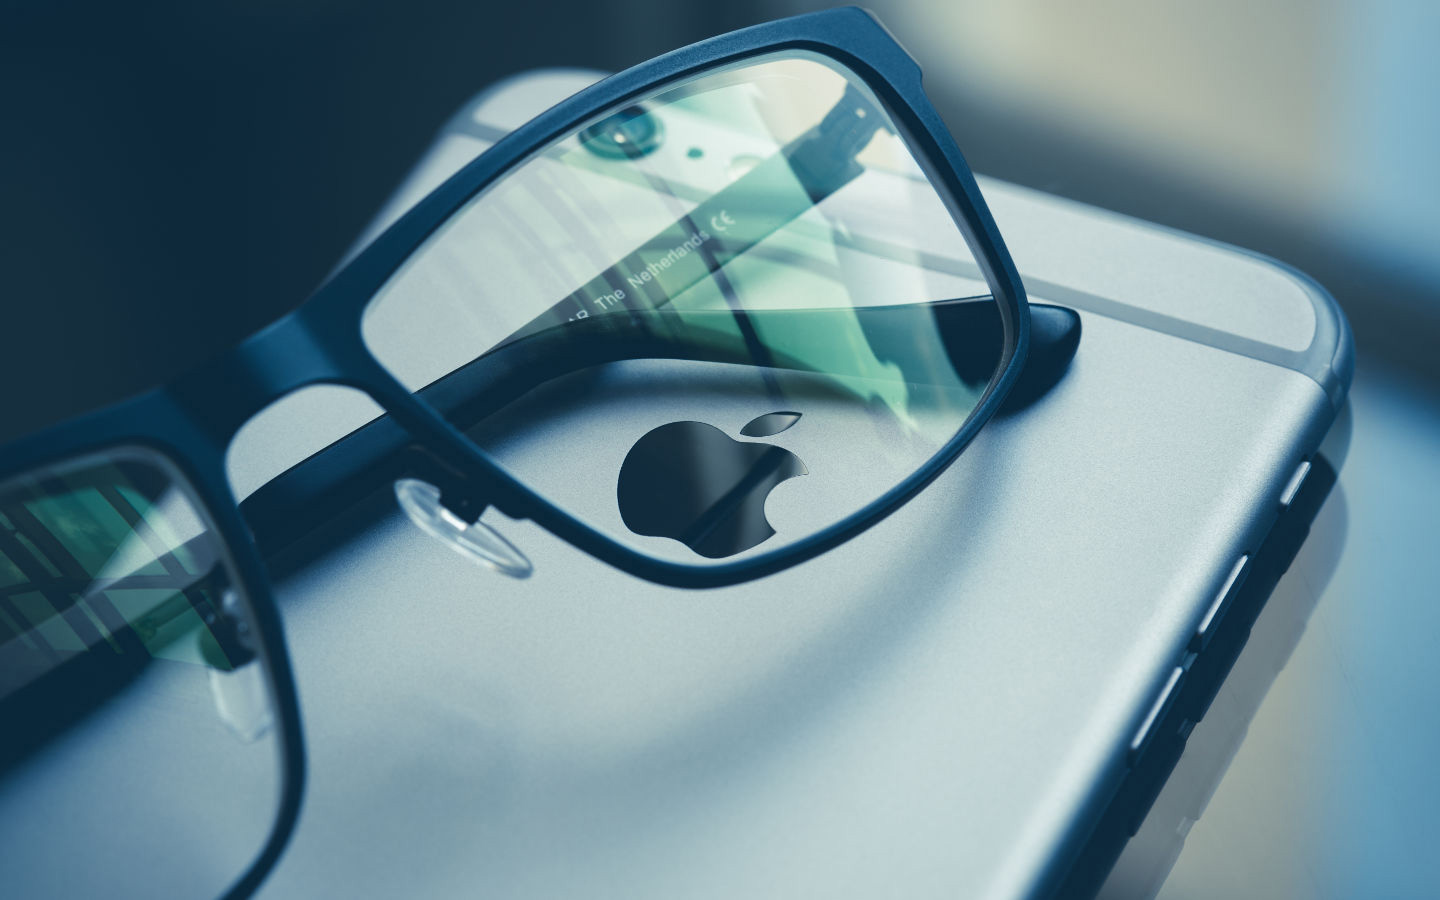 Apple Glasses will connect to your iPhone like an accessory 